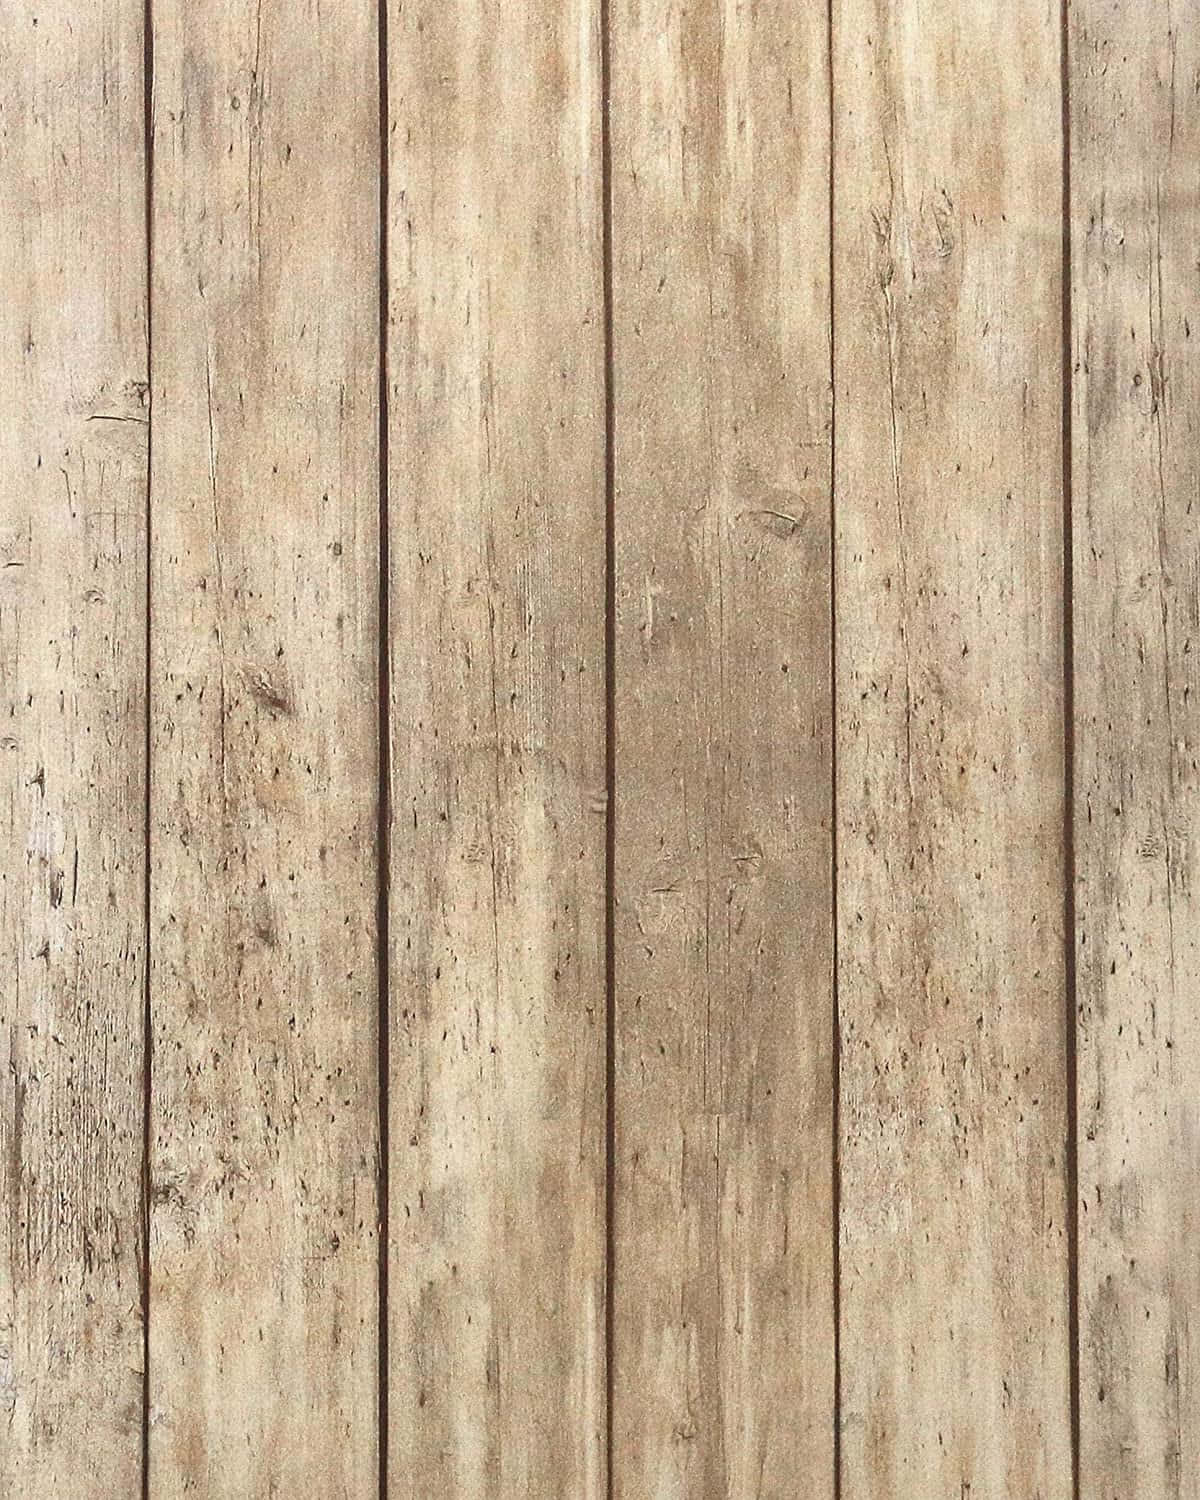 Reclaimed barn wood with a rustic look and feel Wallpaper